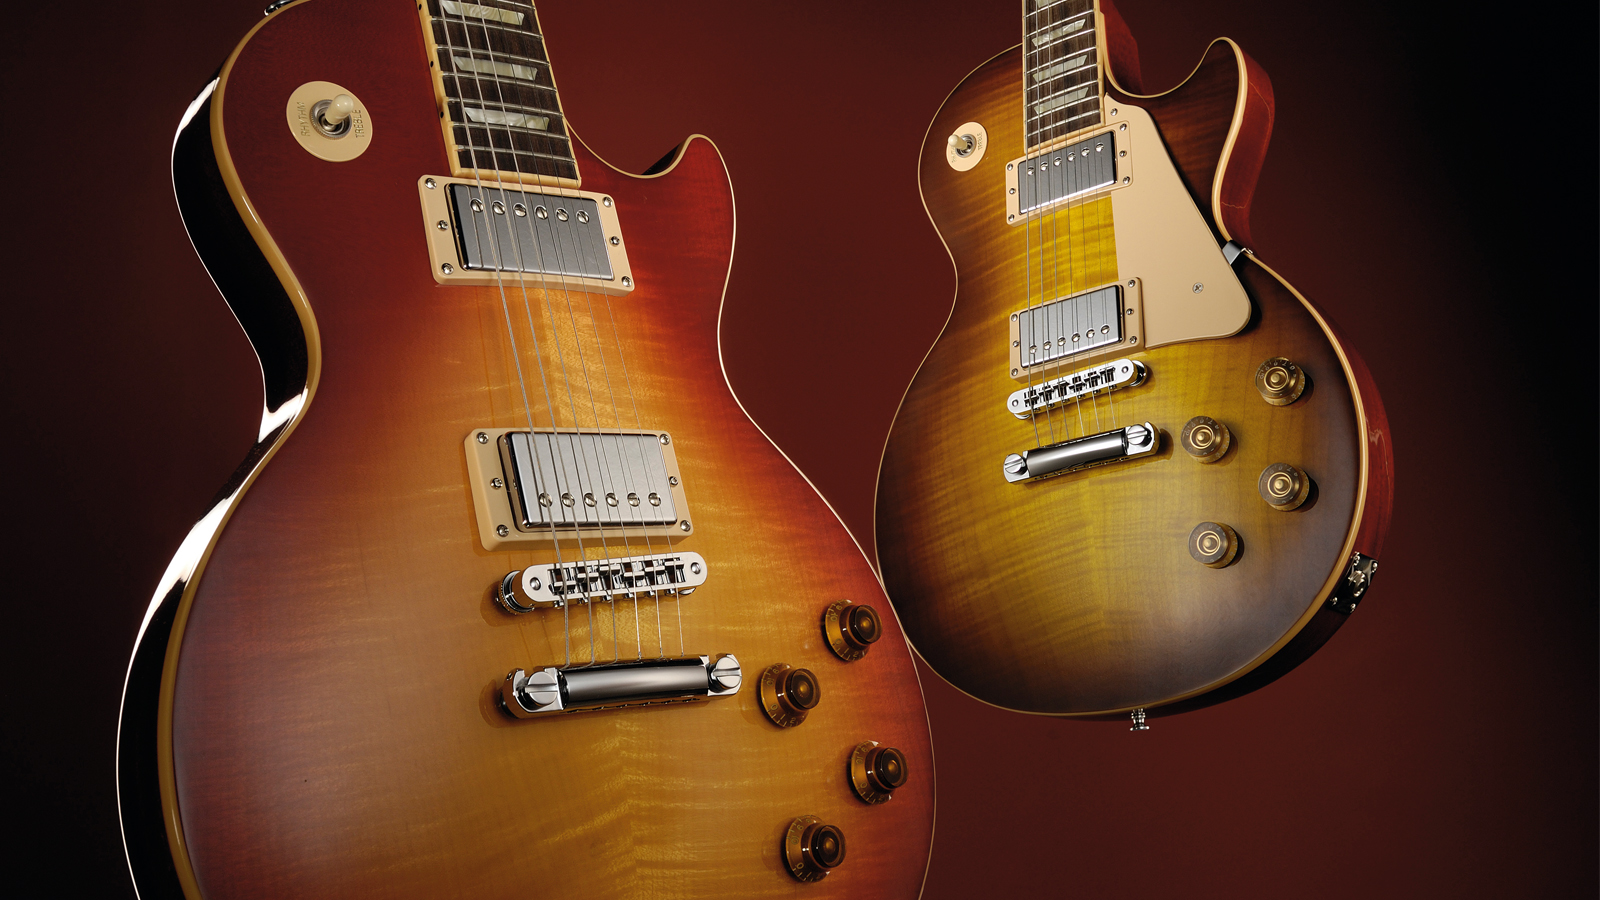 Epiphone Les Paul Vs Gibson Les Paul: What's The Difference